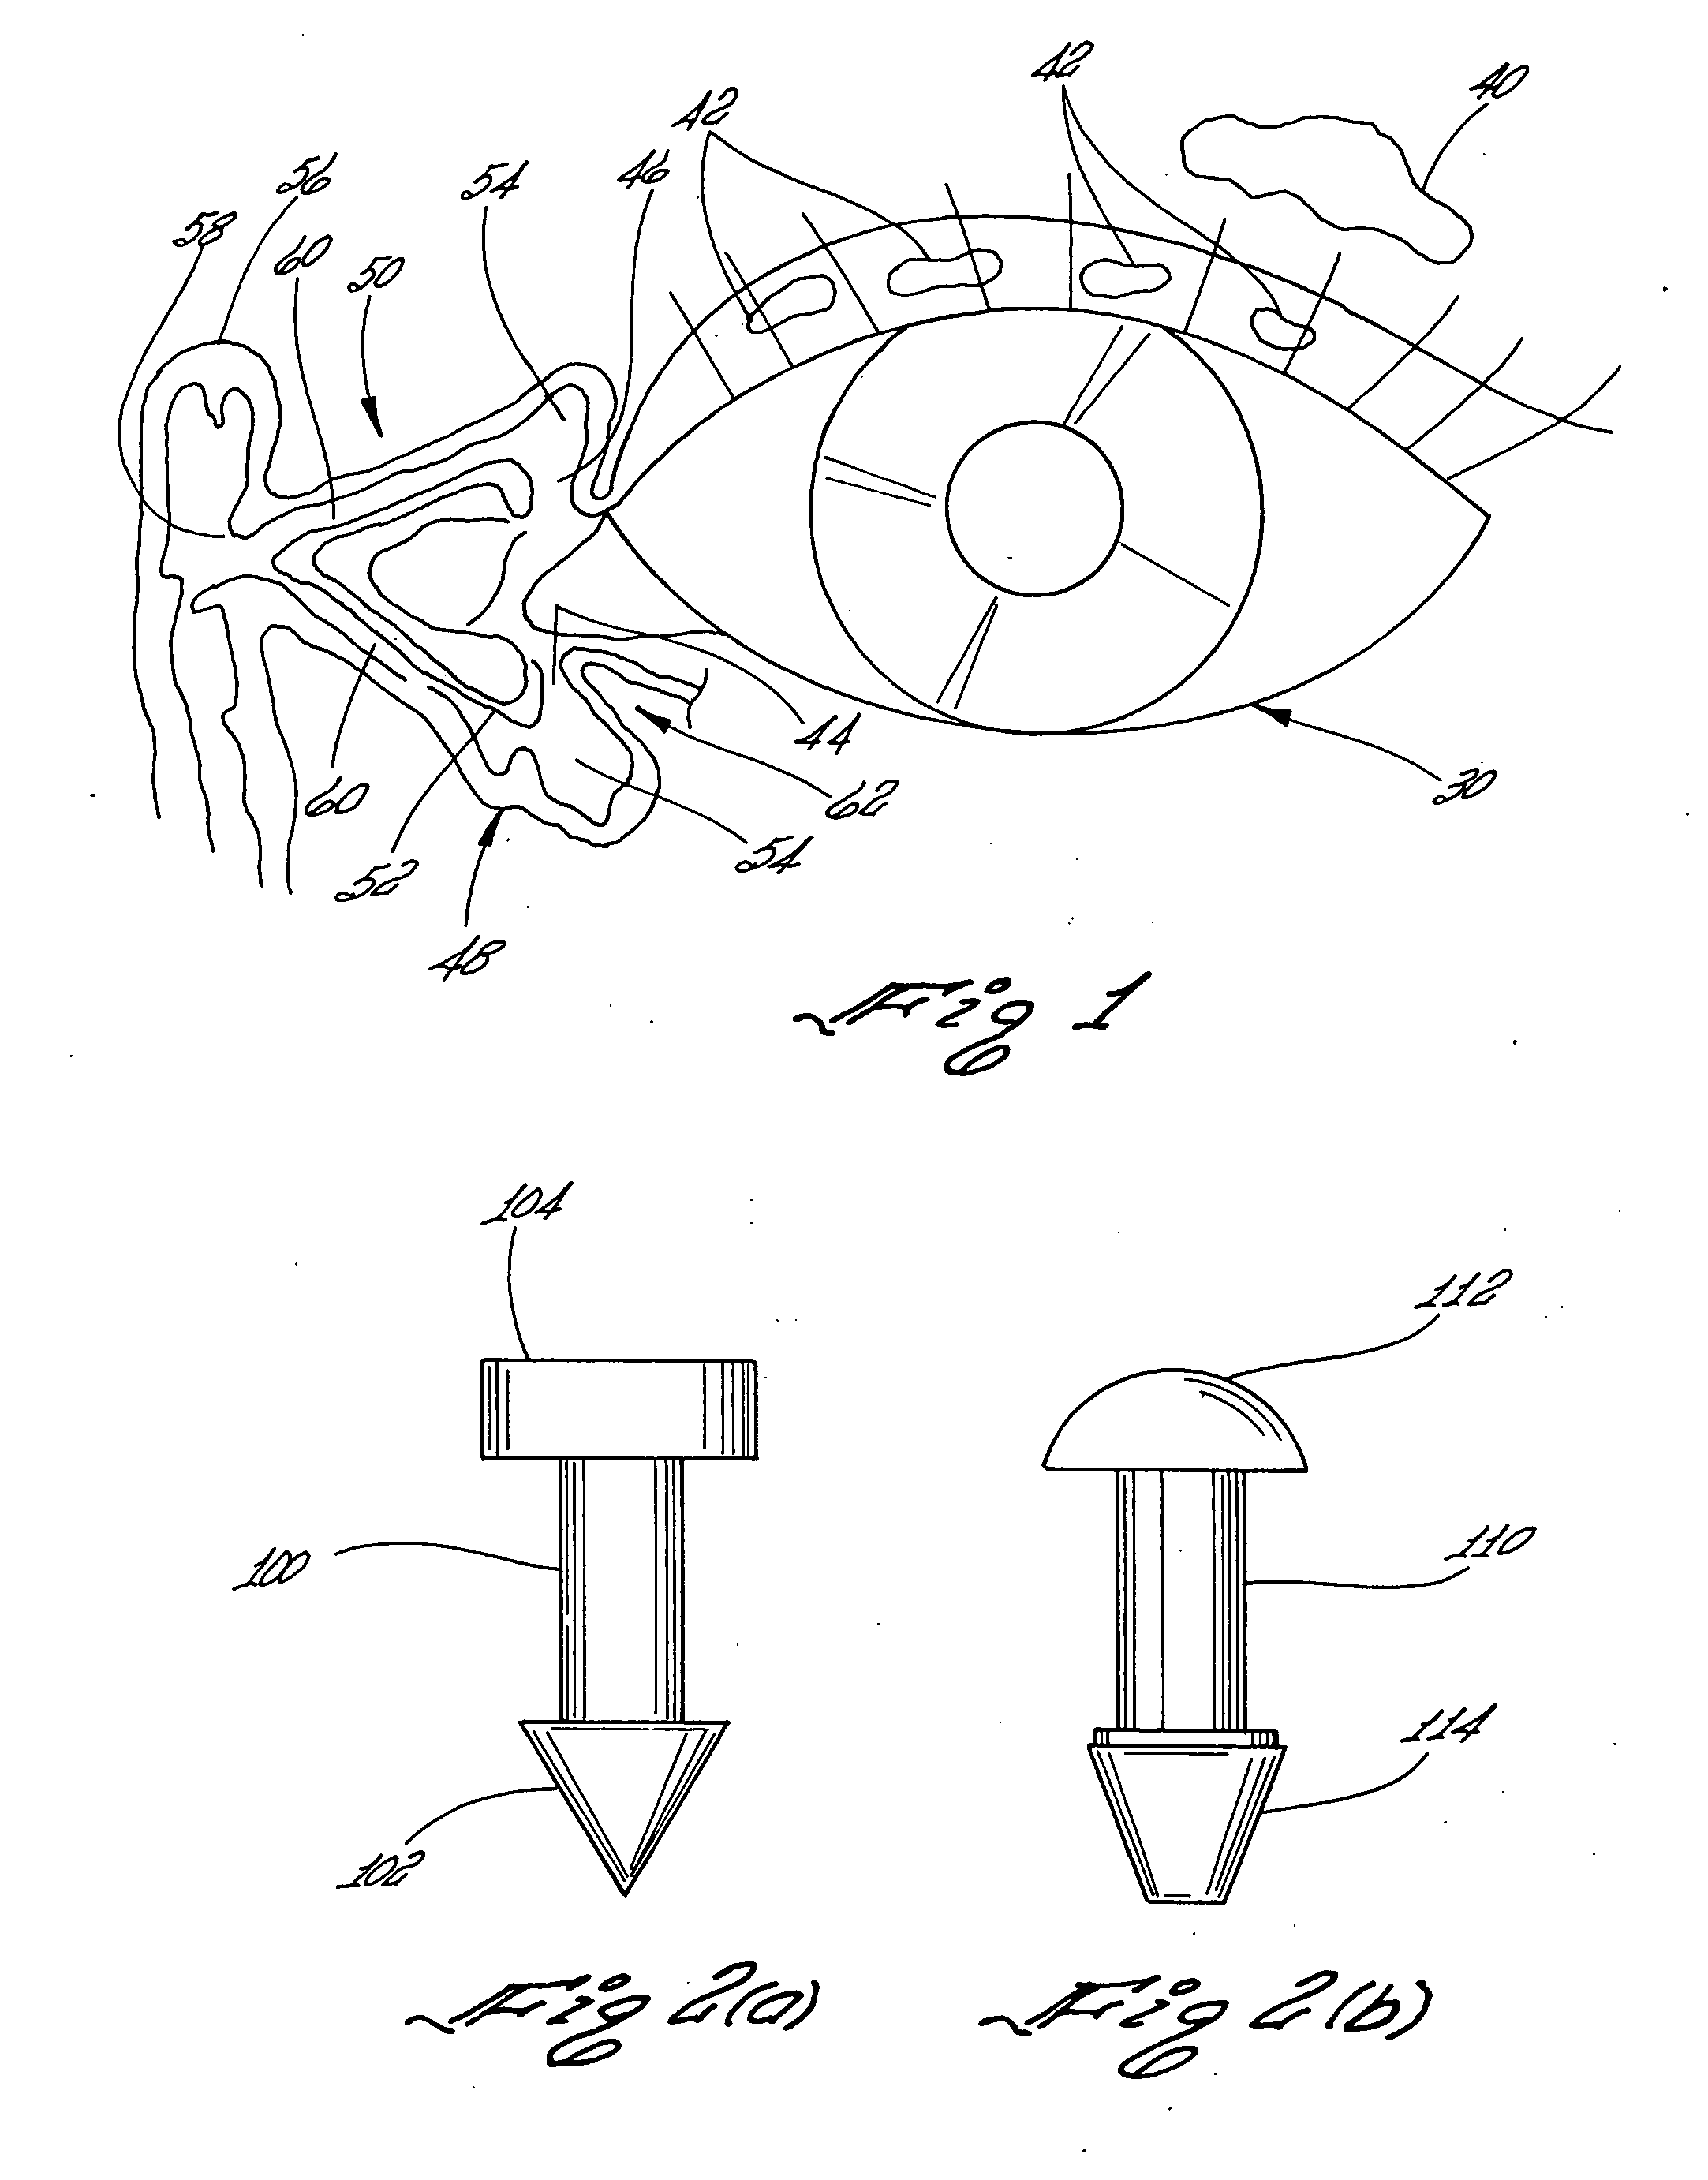 Implant capable of forming a differential image in an eye and methods of inserting and locating same